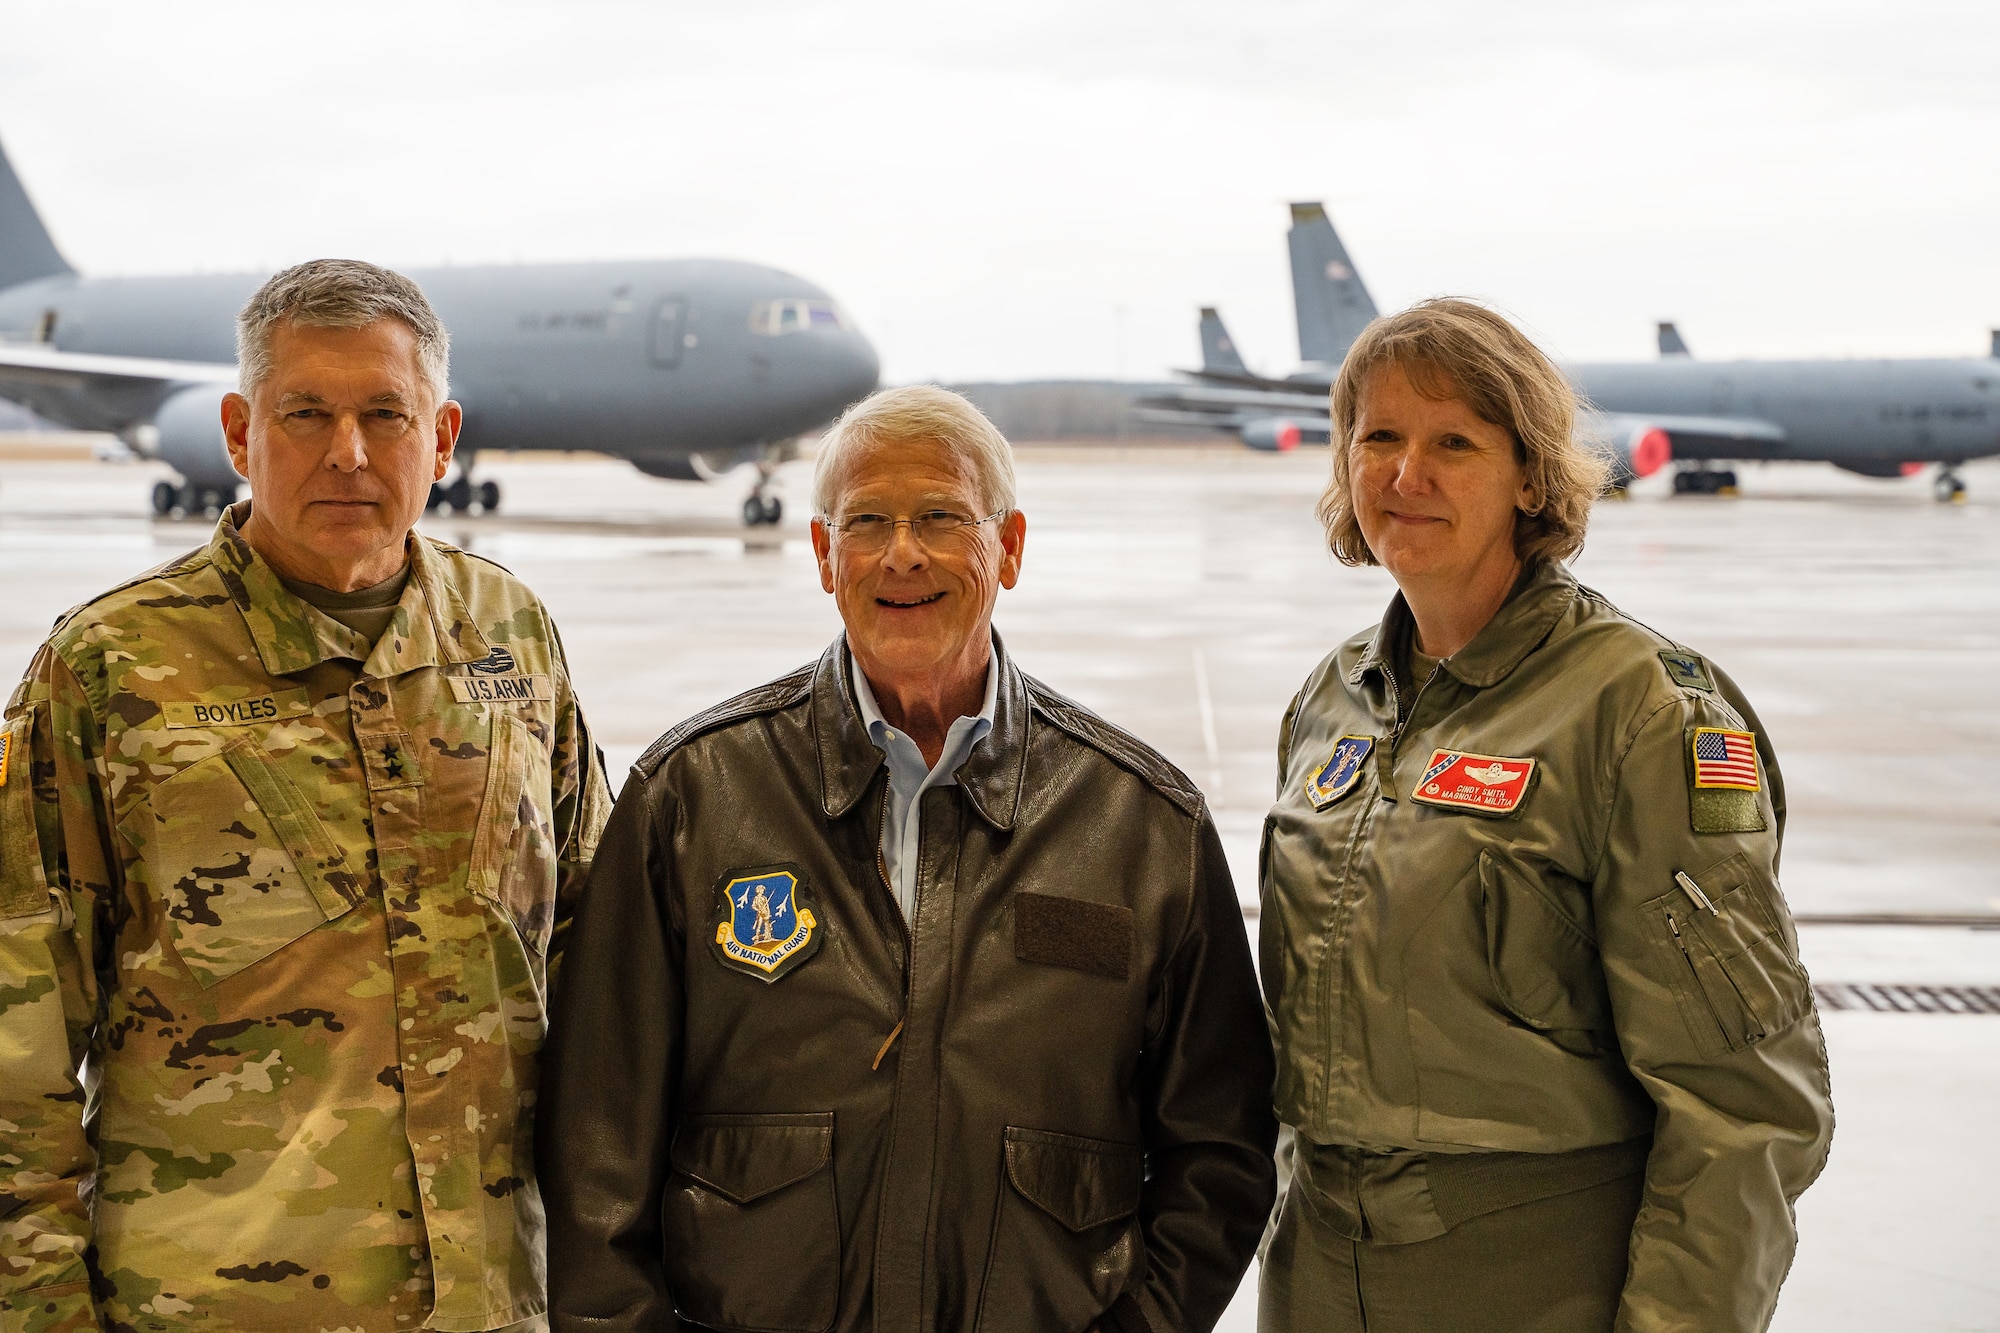 186th Air Refueling Wing hosts state leadership for KC-46 tour